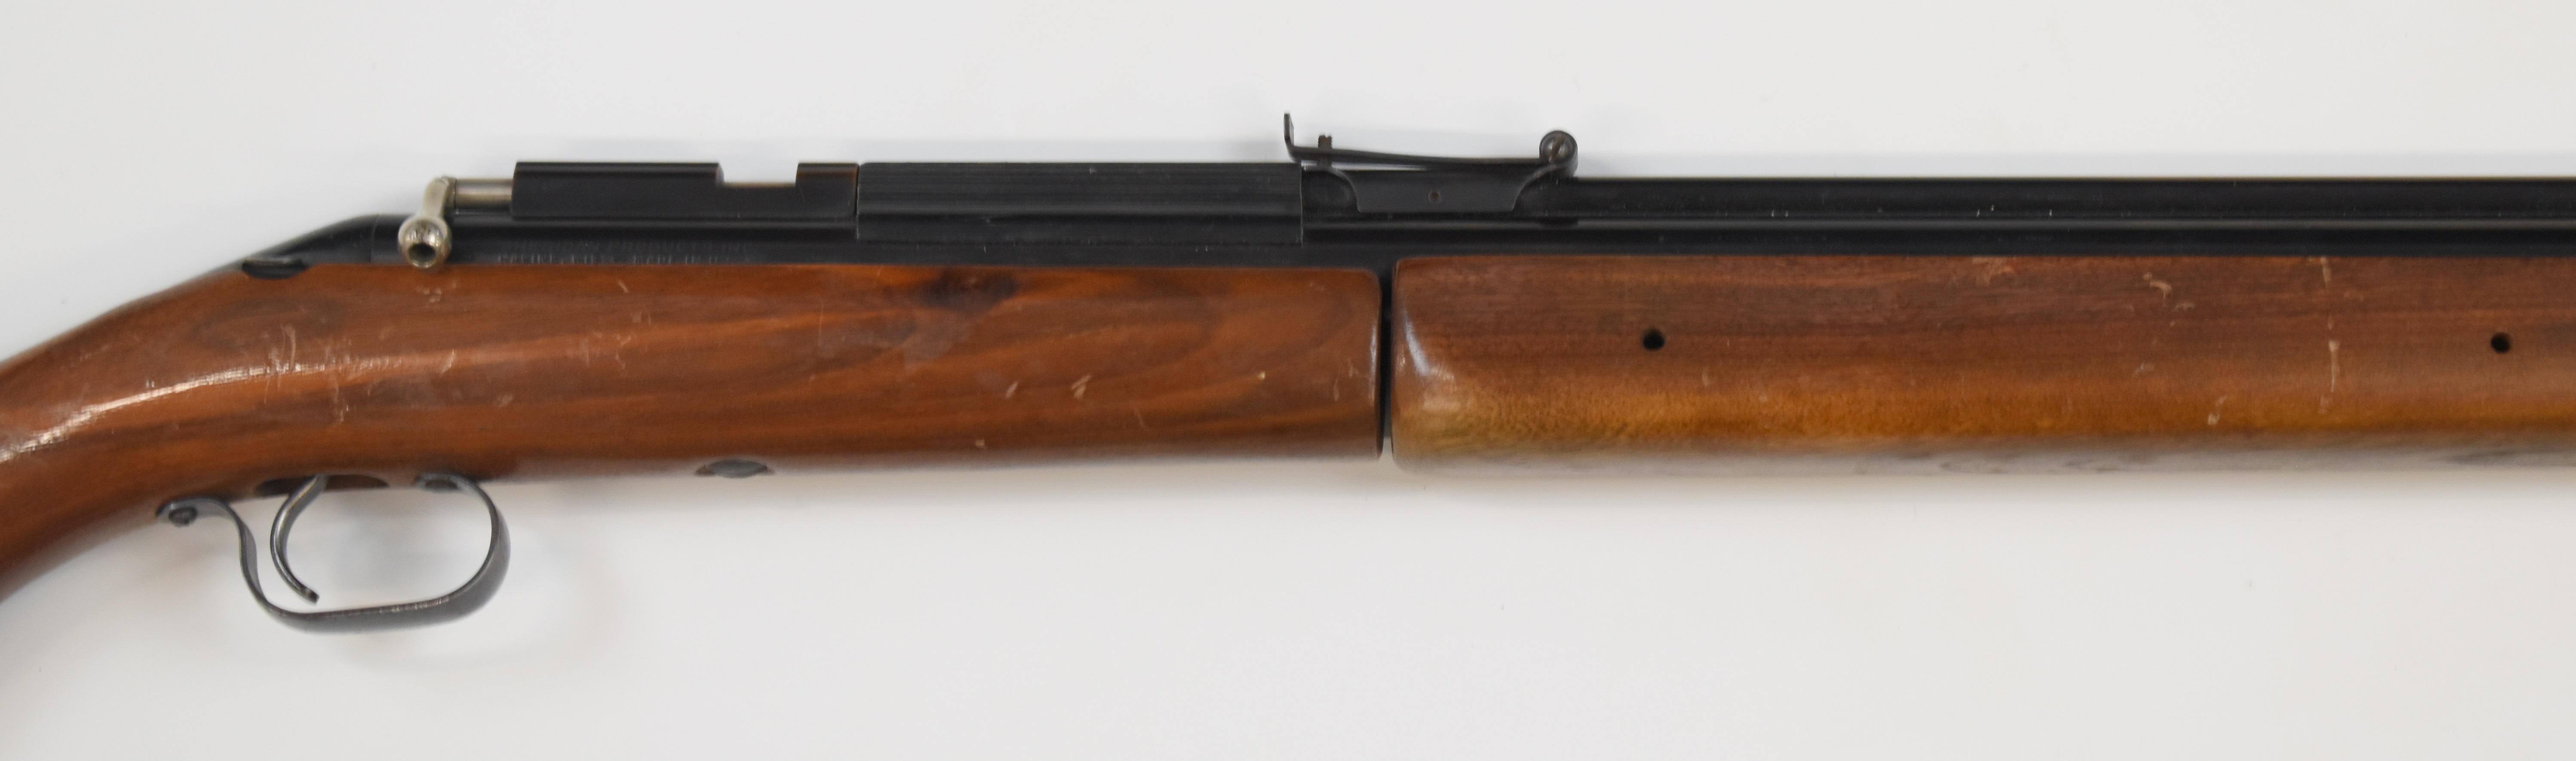 Sheridan Blue Streak .20 bolt-action air rifle with wooden semi-pistol grip and forend and - Image 4 of 8